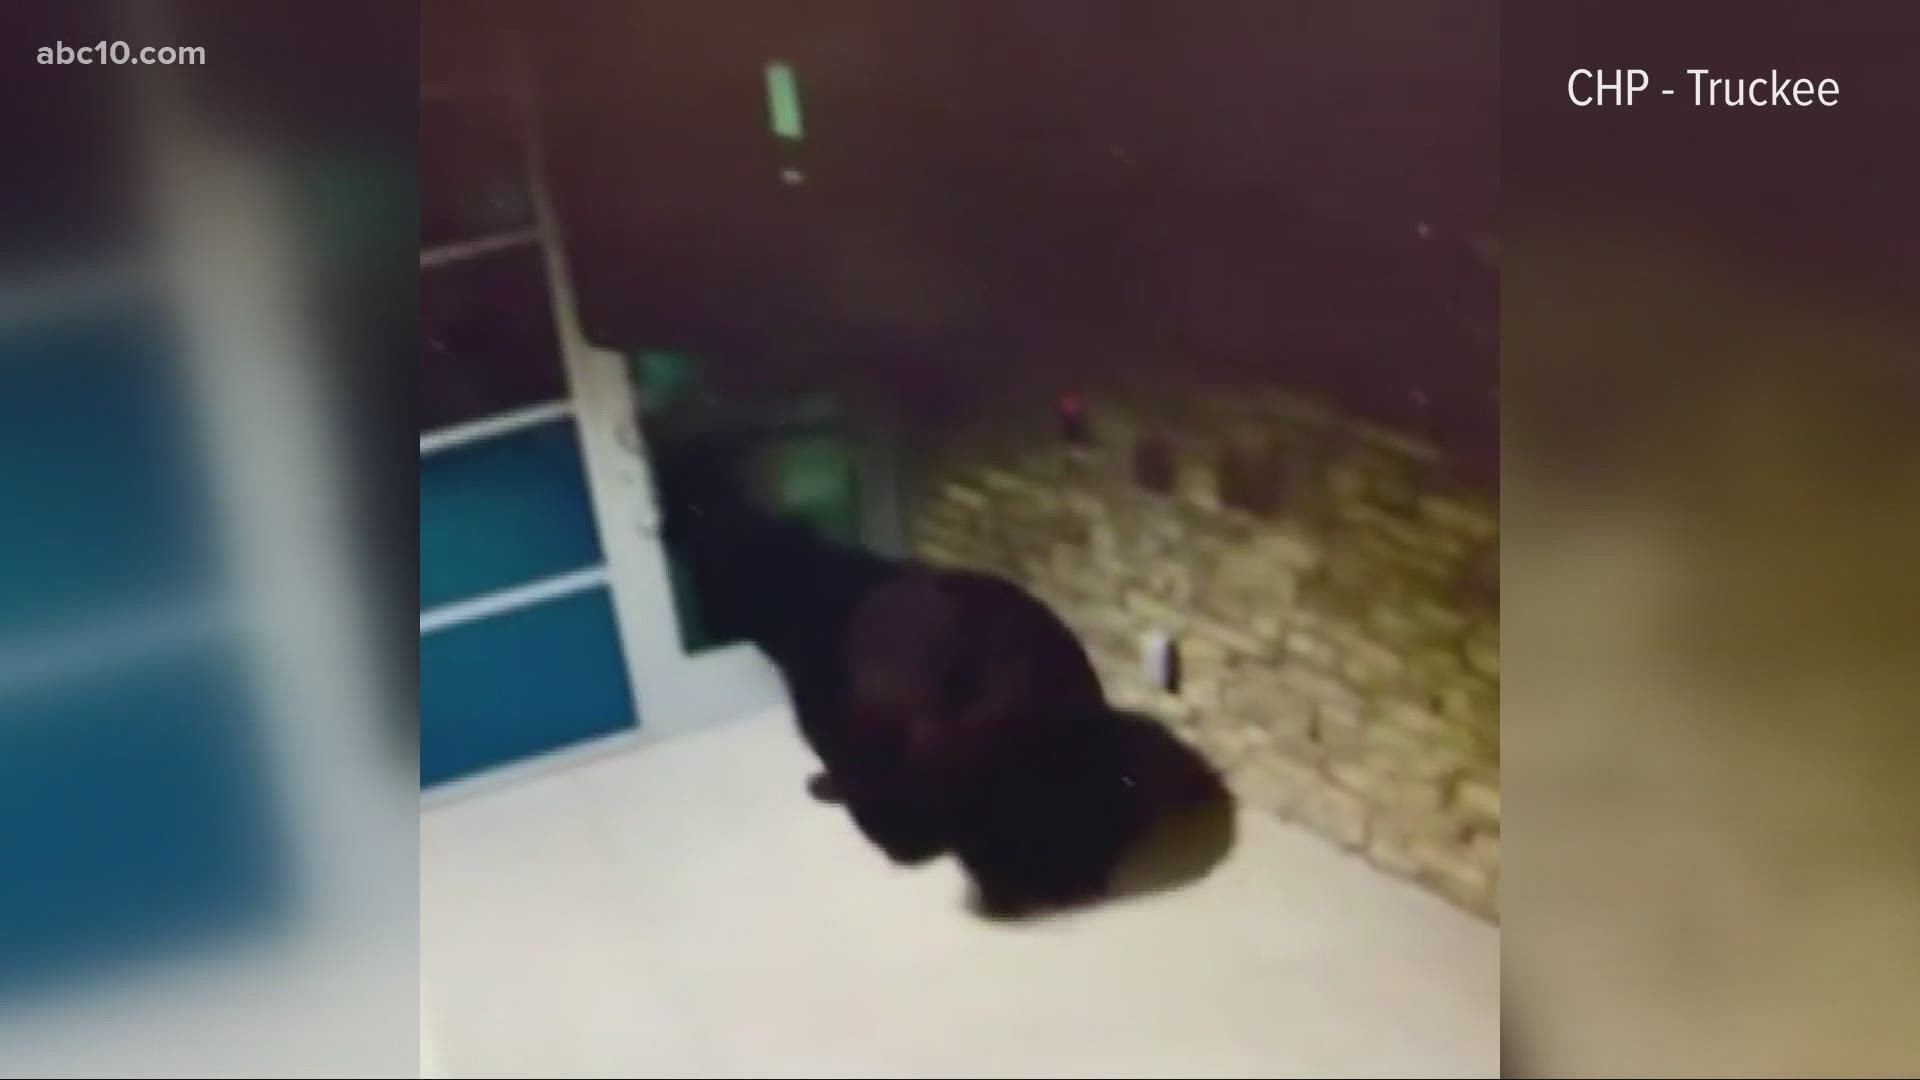 Bear visits CHP office in Truckee